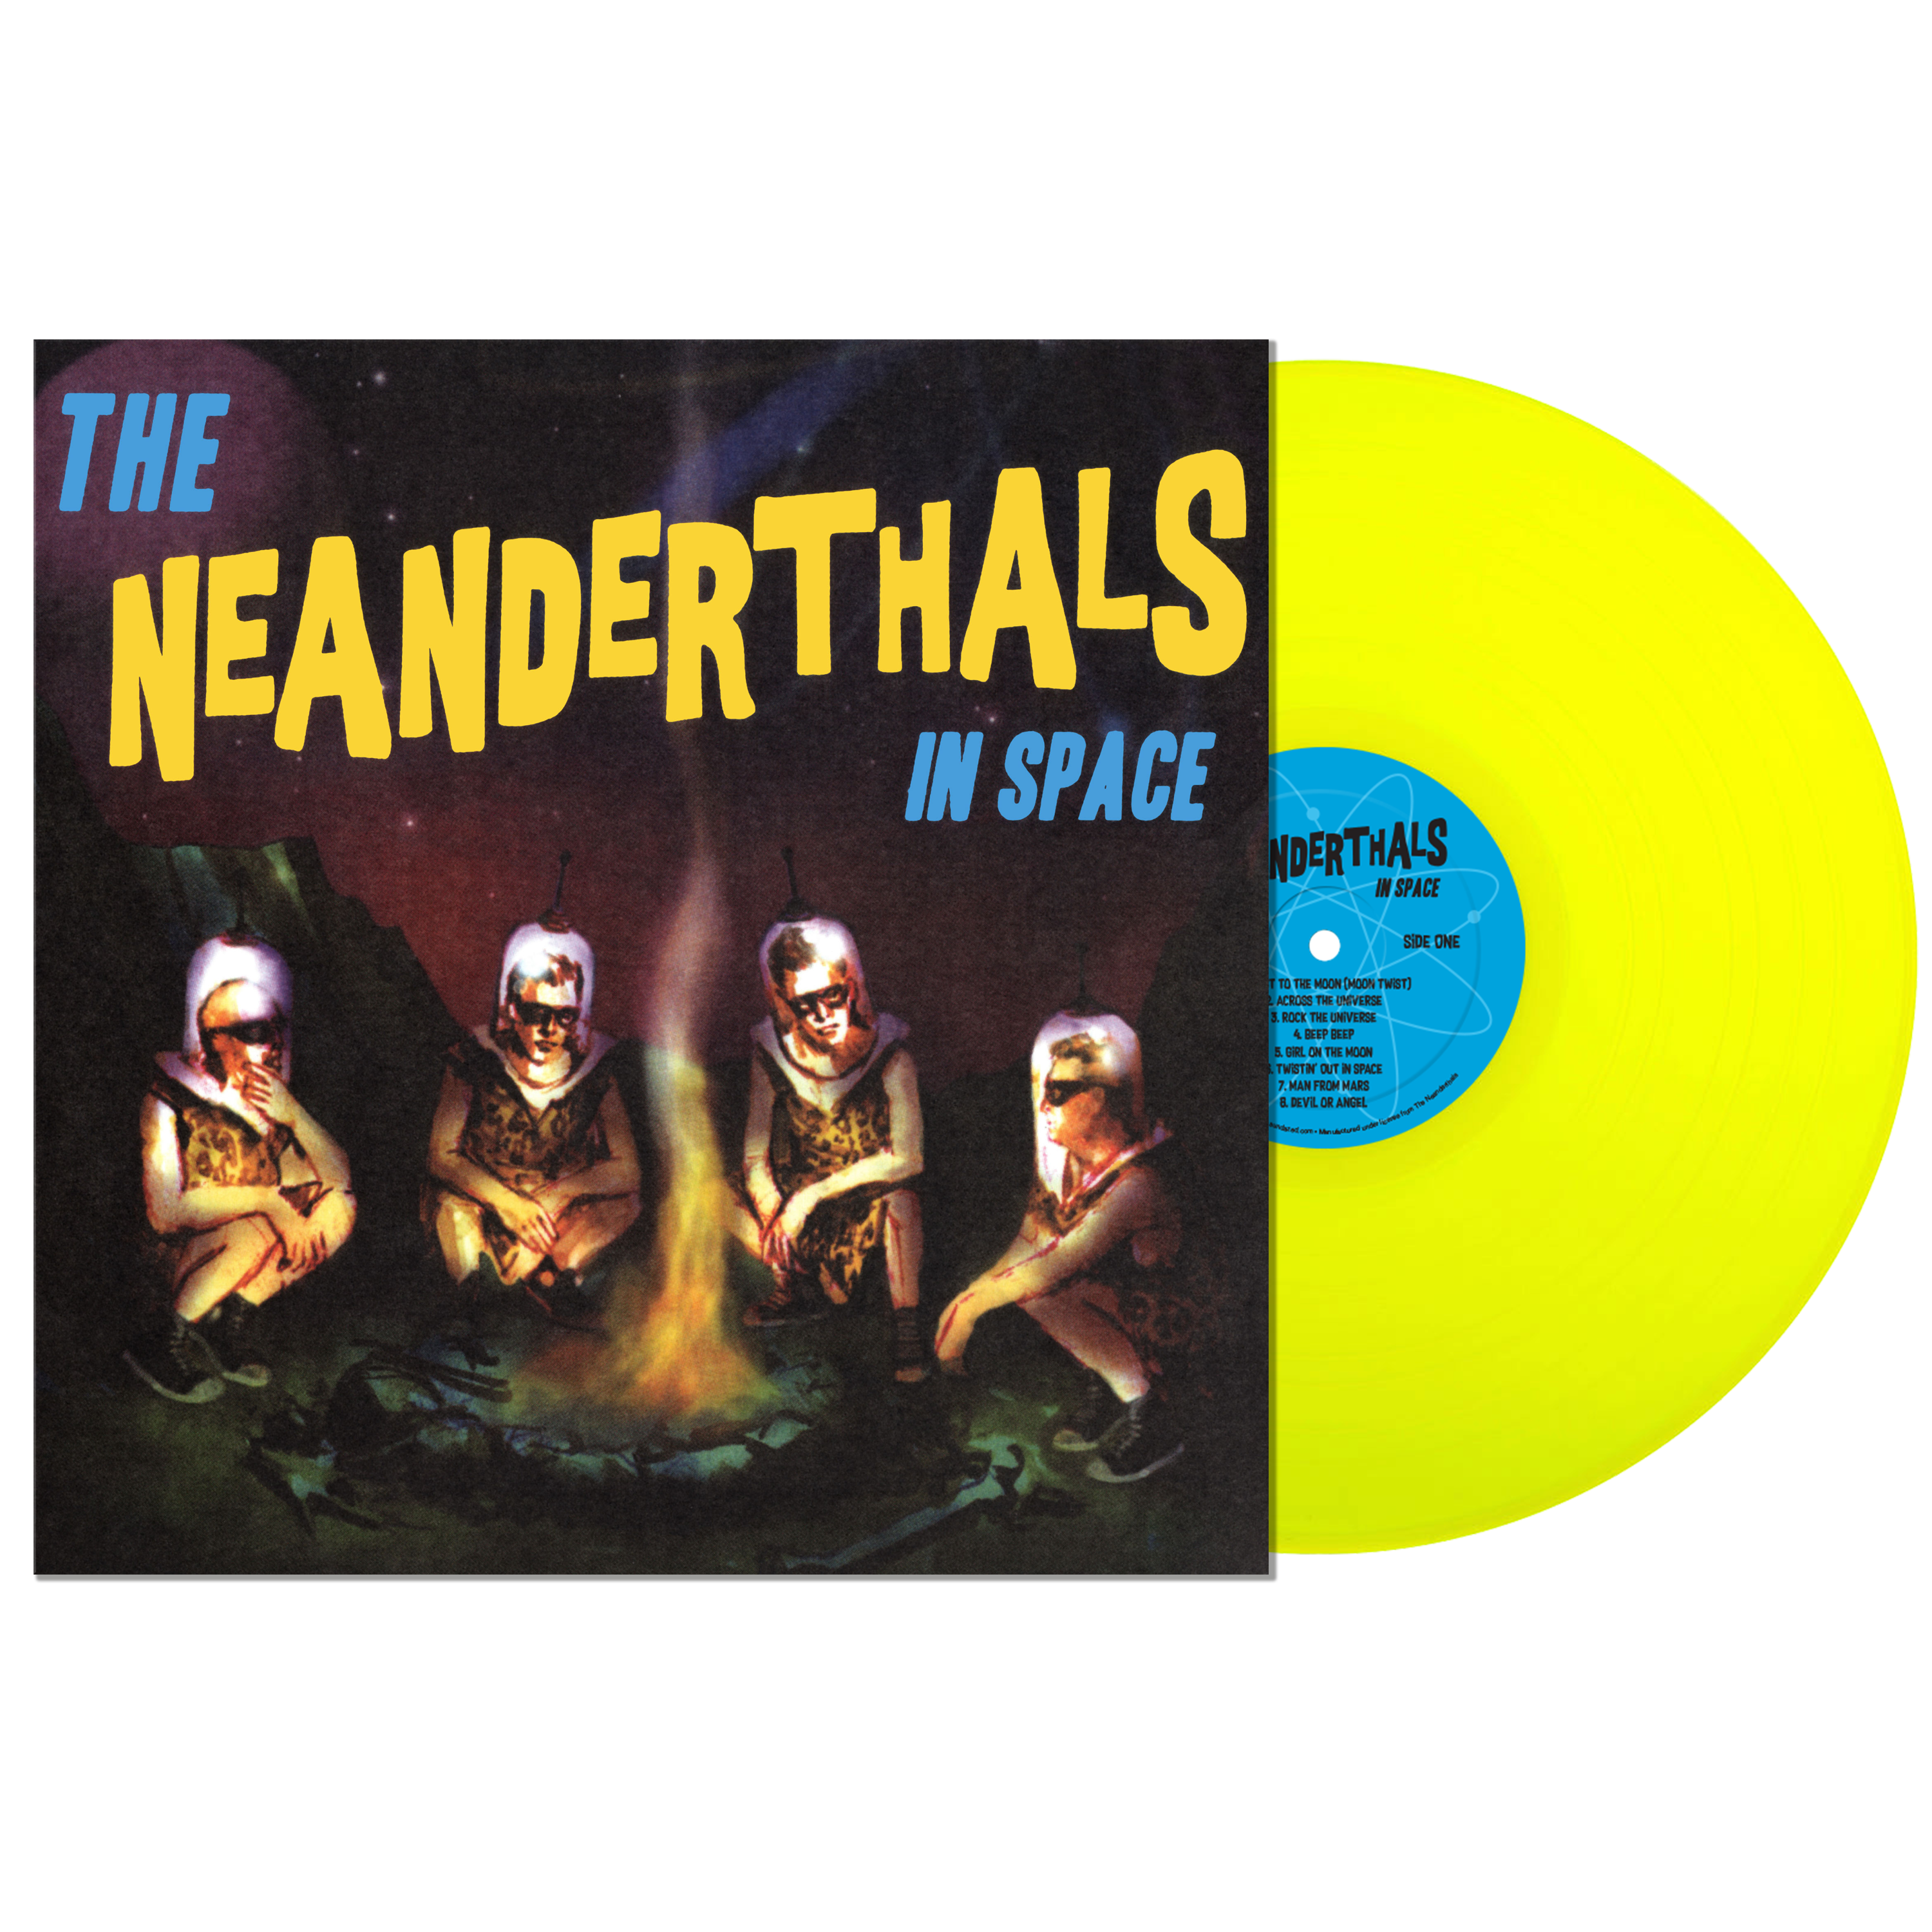 Neanderthals, The - The Neanderthals In Space - Yellow Vinyl LP  